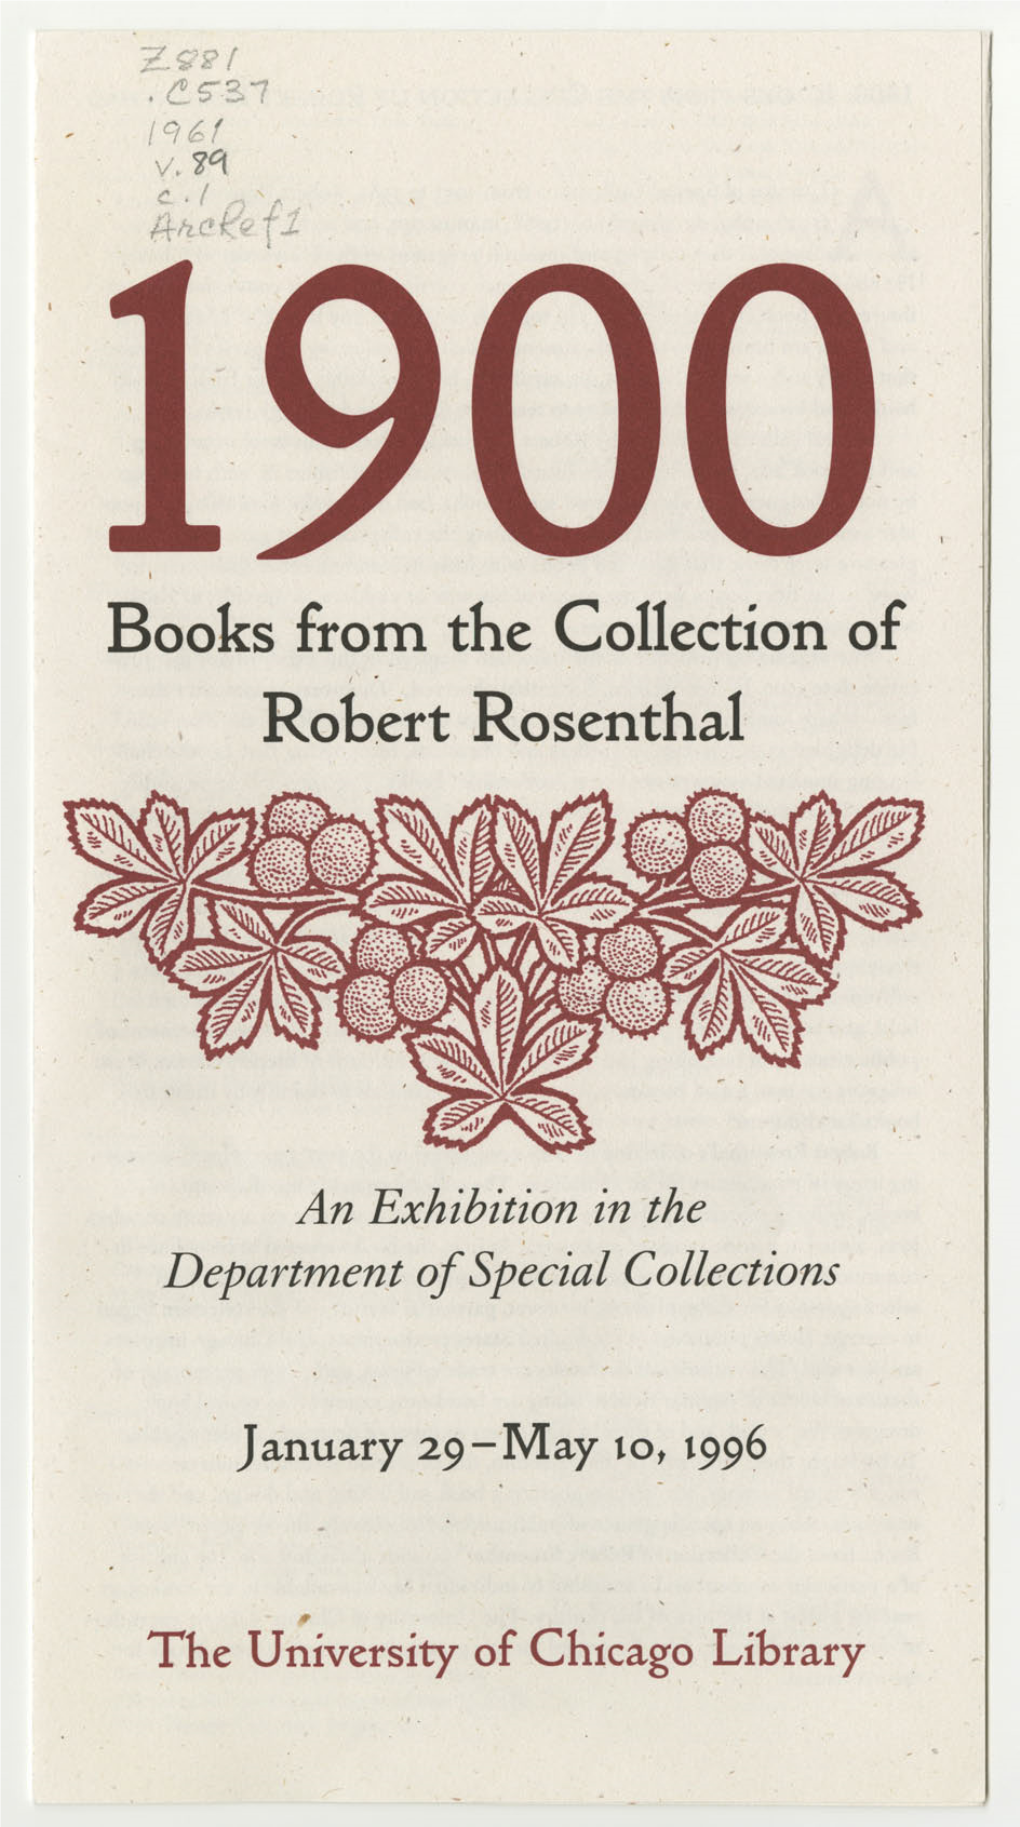 Collection of Robert Rosenthal